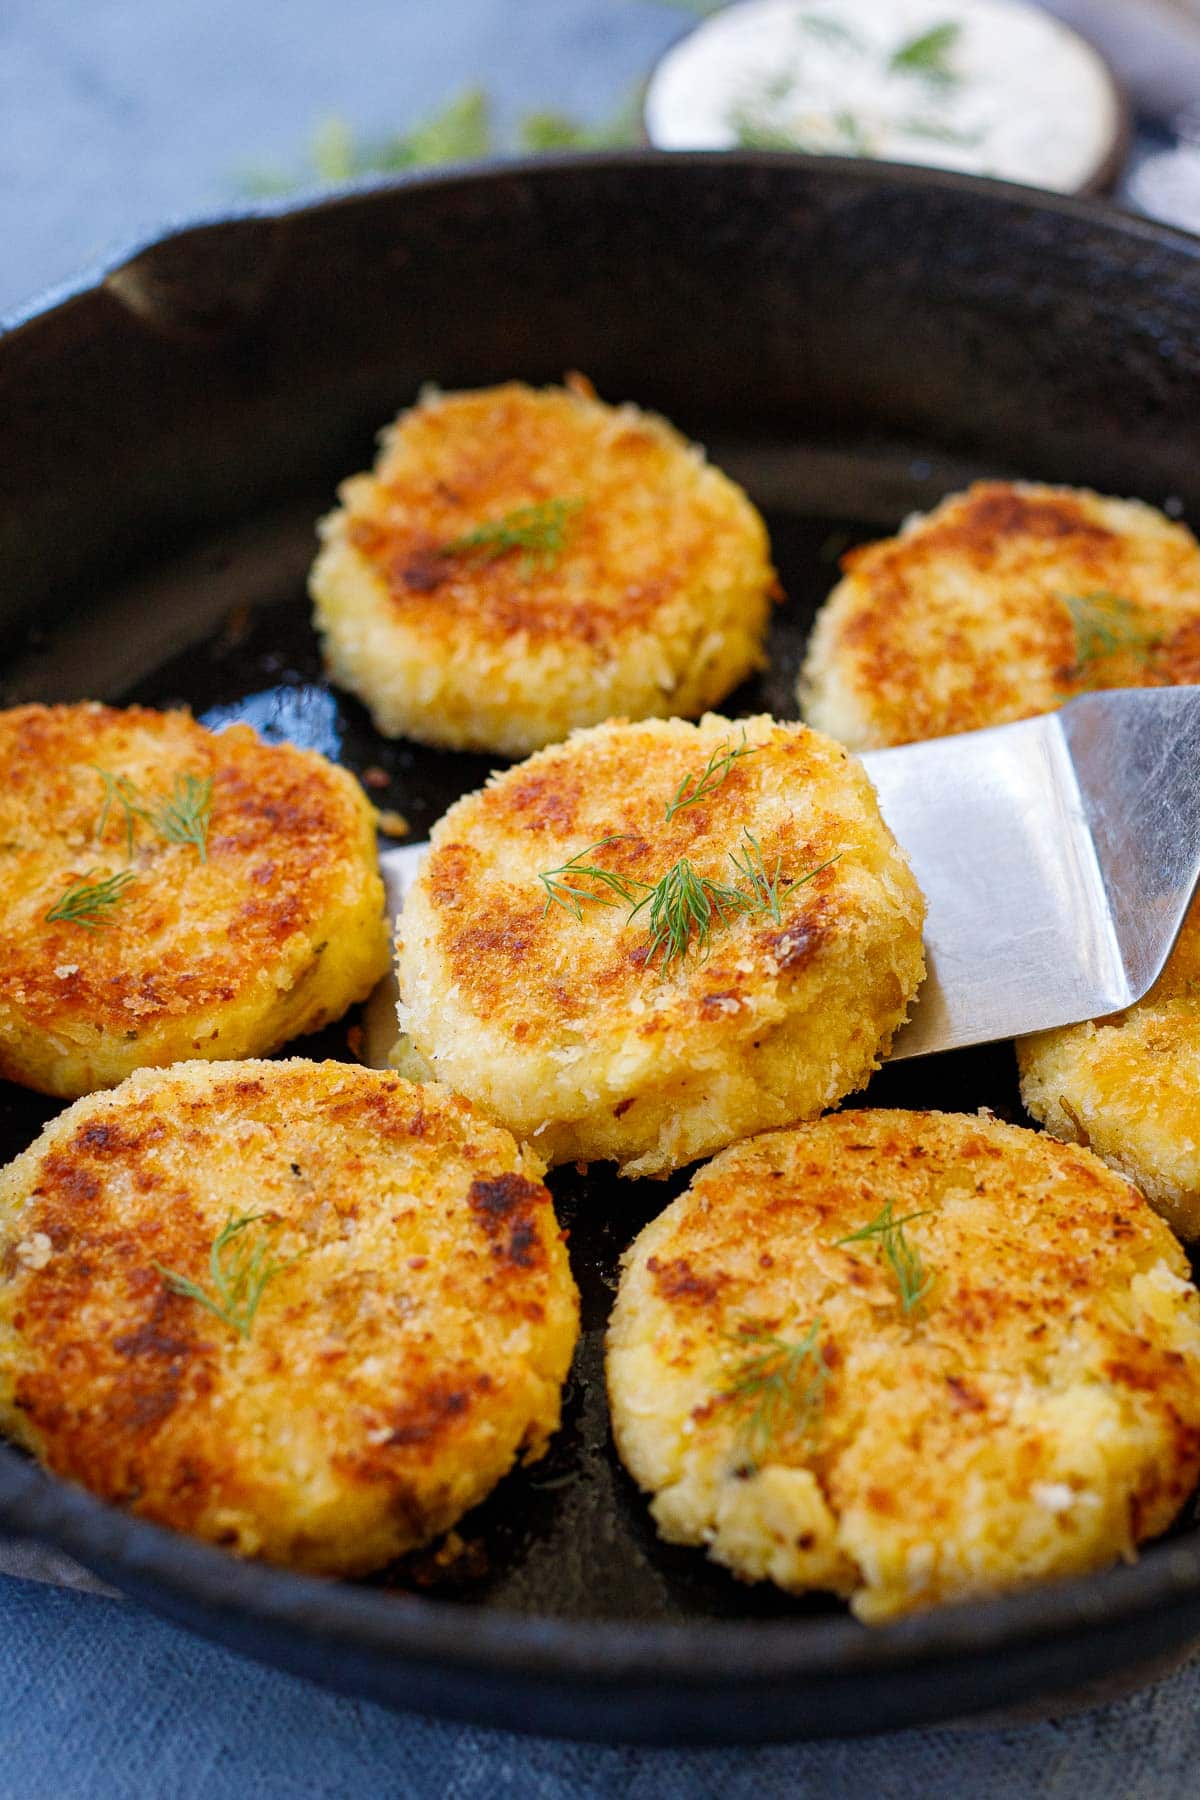 Crispy, mashed potato cakes in a skillet garnished with salt and dill.